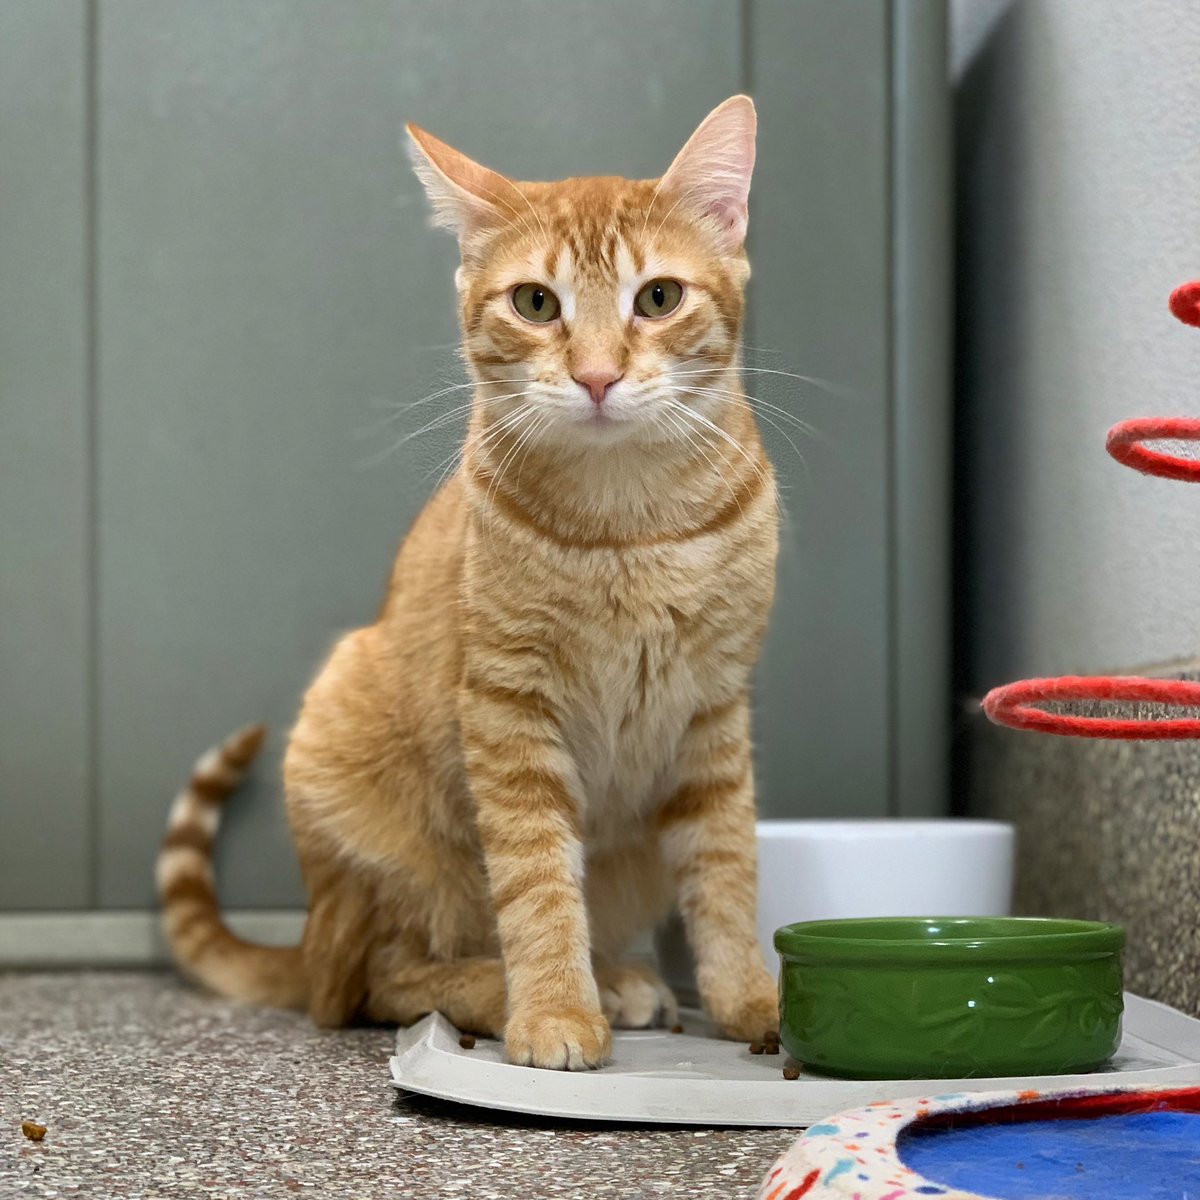 Sorel specifically asked for kibble sauce on the side.

cdhs.net #sheltercat #adoptdontshop #cats